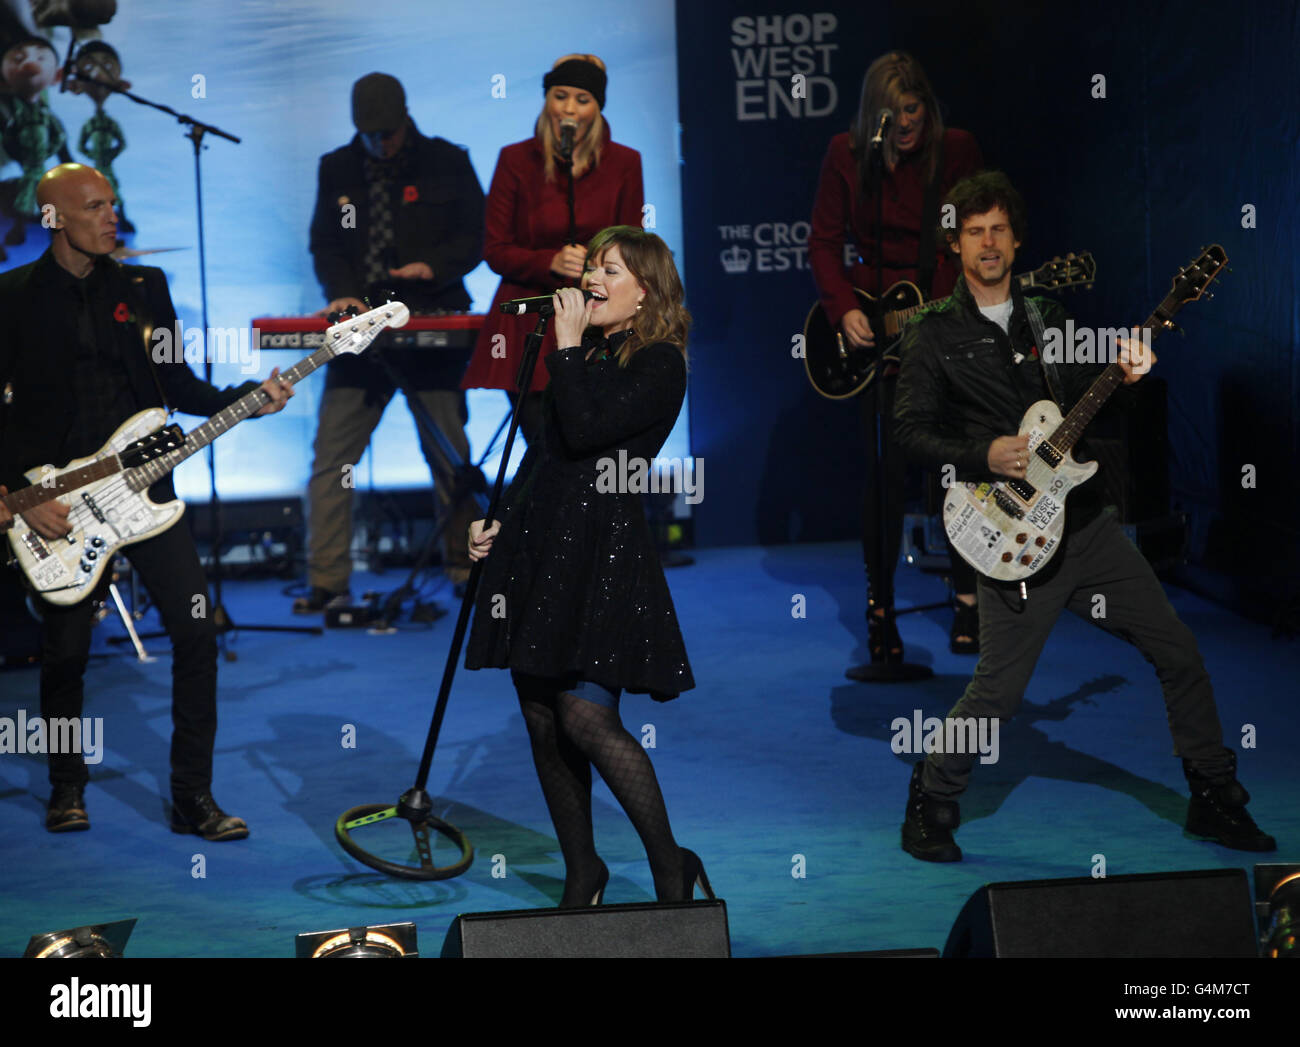 Kelly Clarkson performs at the Regent Street Christmas Lights 2011 switch on in central London. The lights were officially turned on by Bill Nighy and Ashley Jensen from the new 3D film Arthur Christmas. Stock Photo